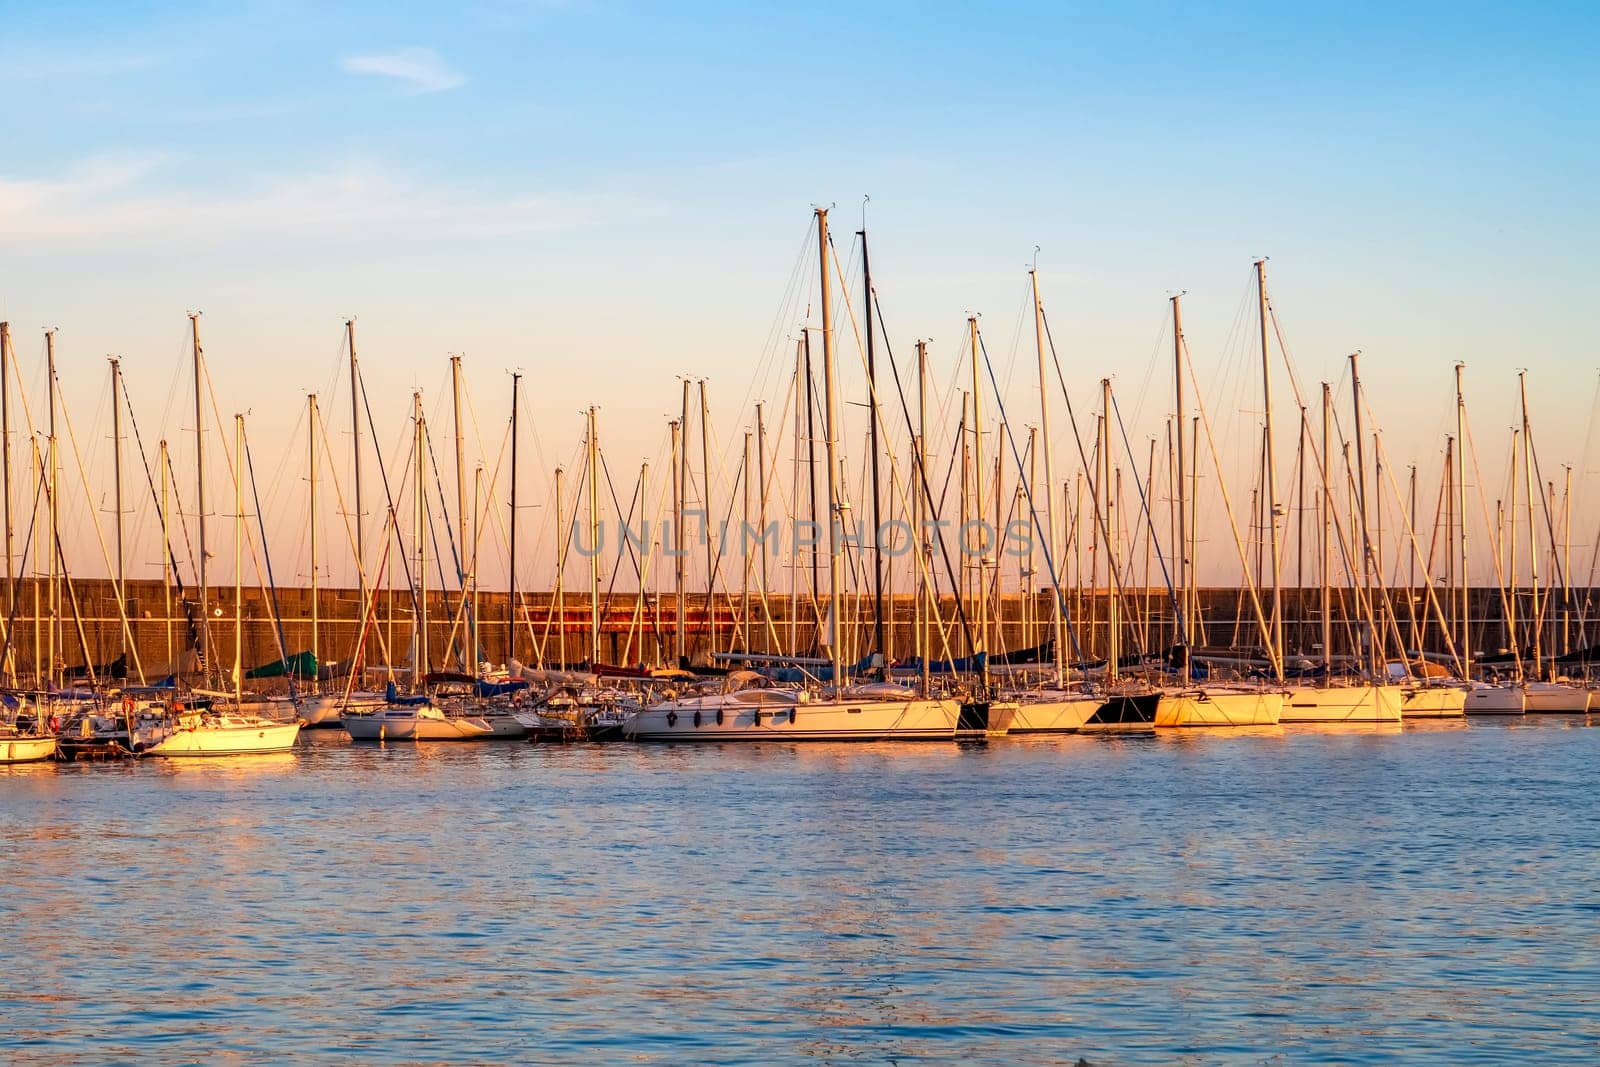 Yachts and boats at sunset in a marina. Sunset at port.  by EdVal